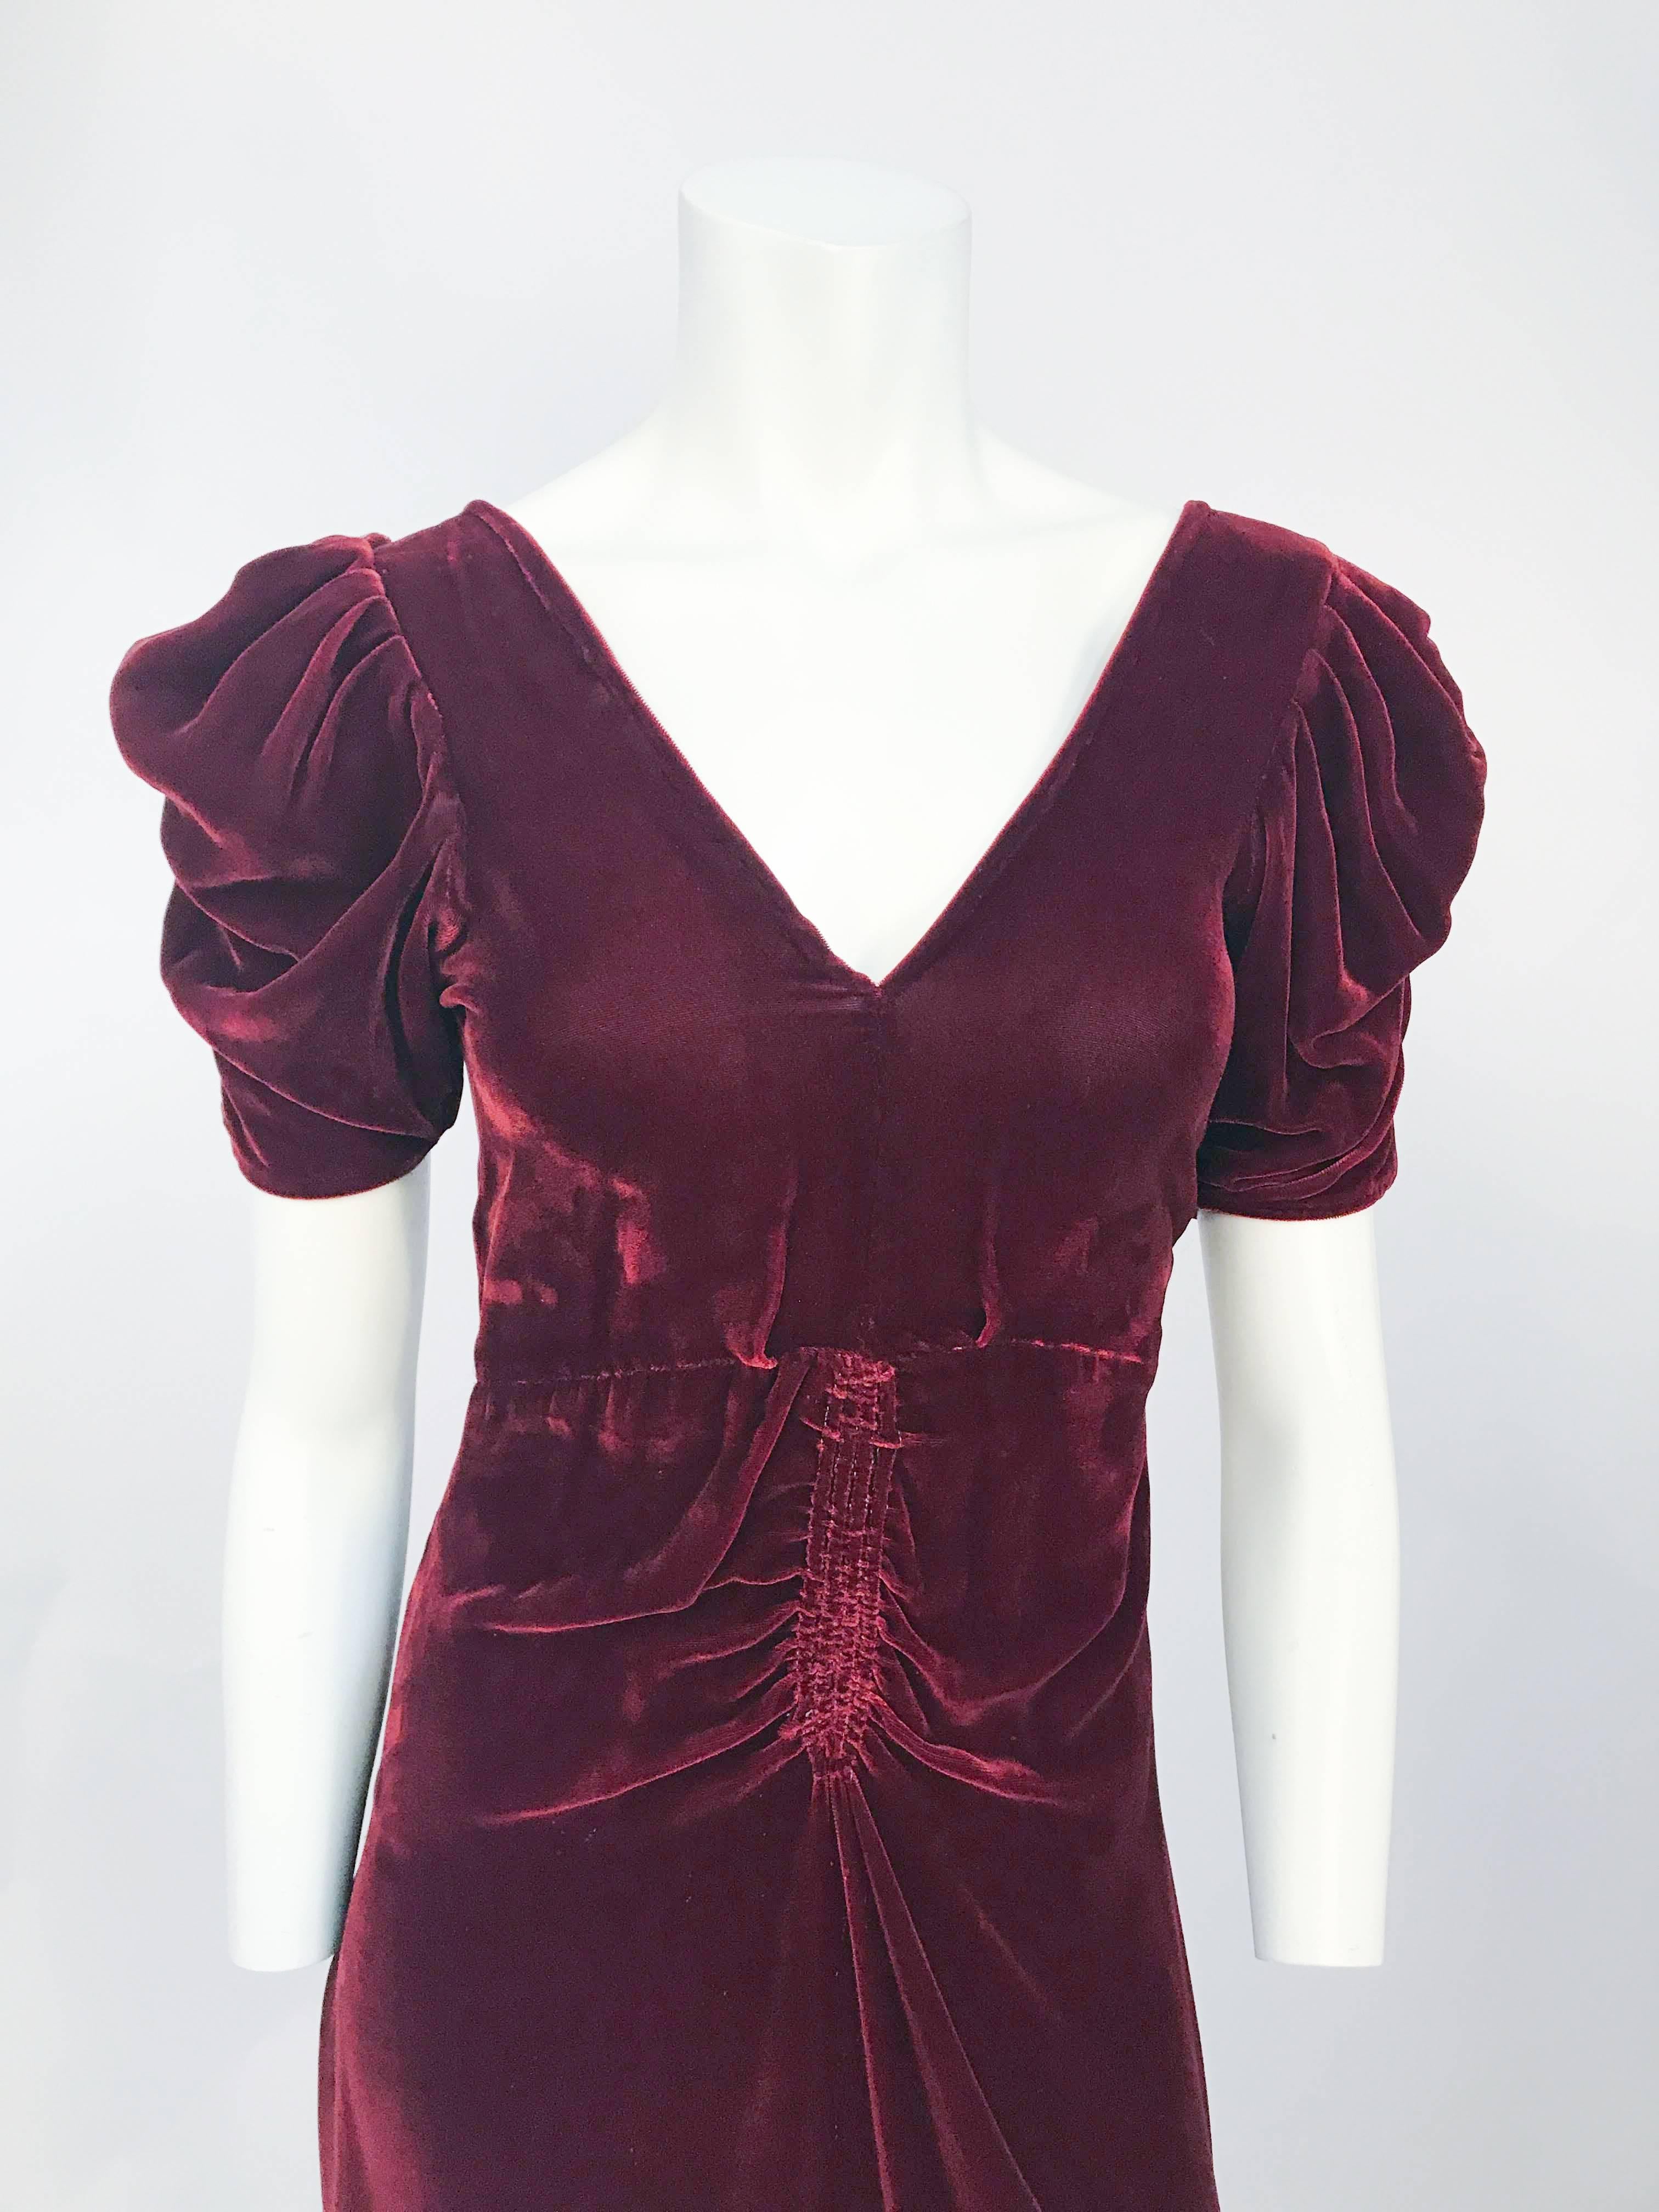 1930s very Dark Rust Silk Velvet Ruched Evening Gown. Sleeves have been draped into folds that almost extend to the elbow. The bodice has a deep v-neckline and in addition the waist is emphasized by several inches of vertical ruching and attached